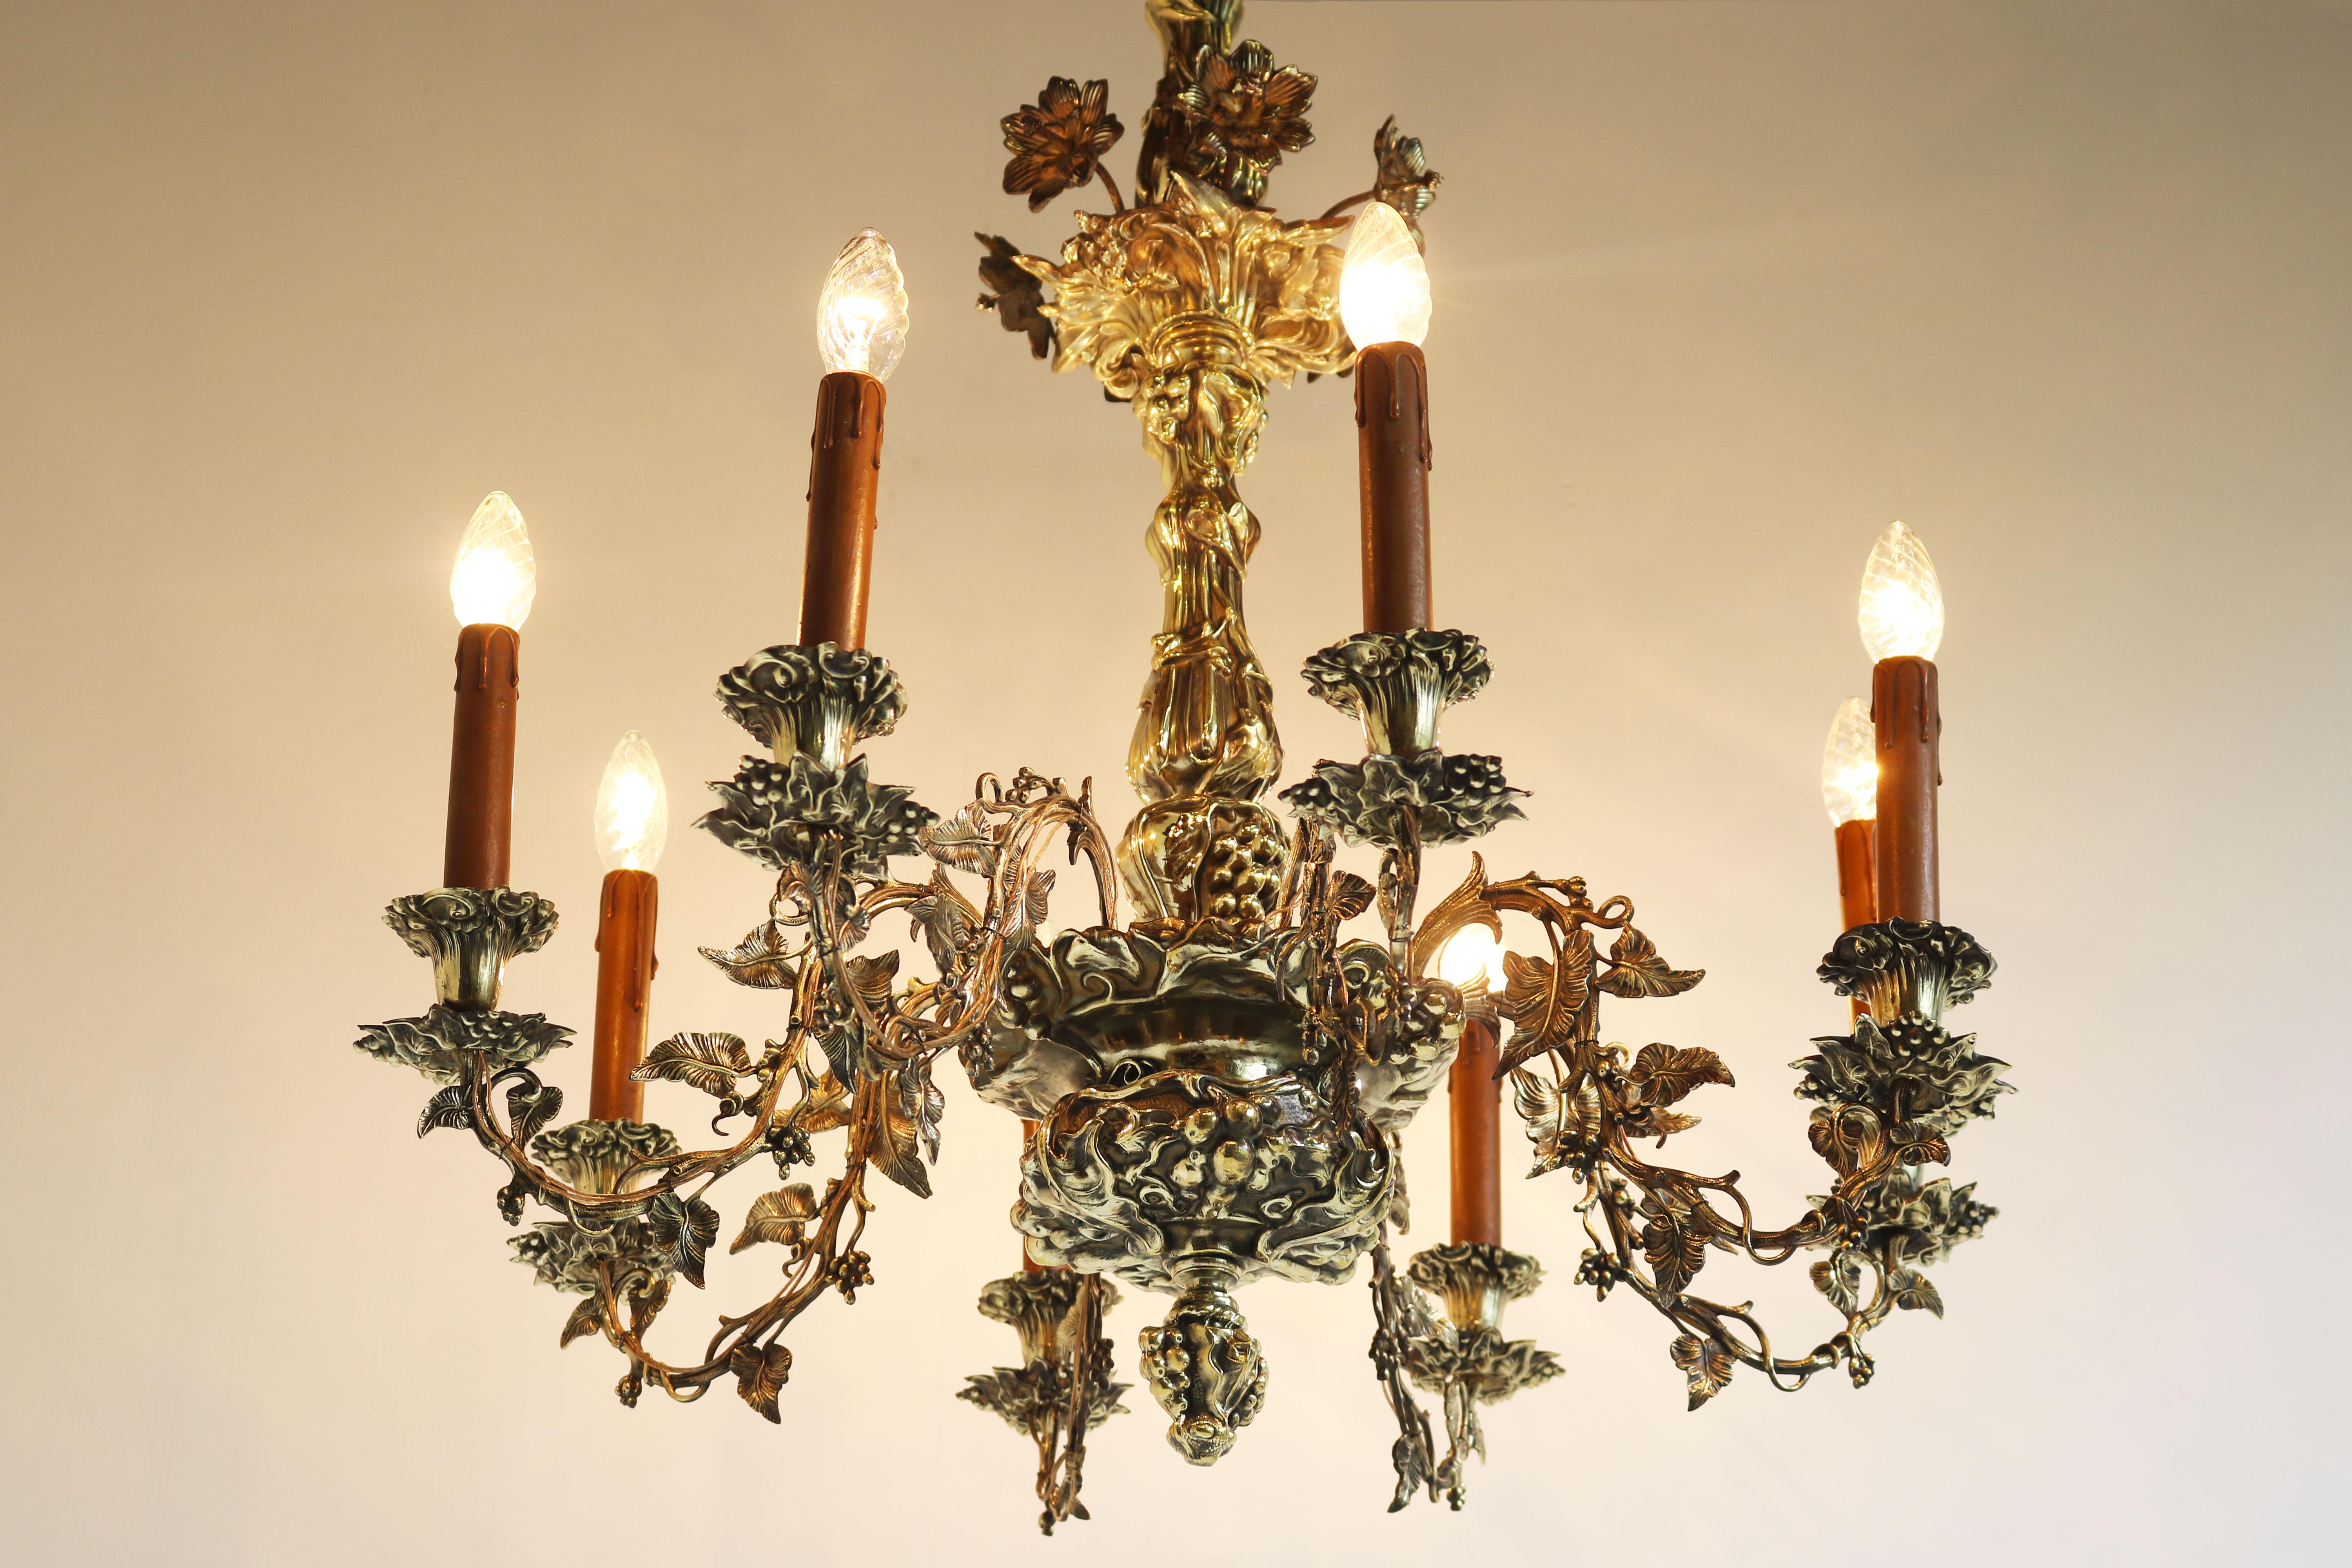 Breathtaking & exceptional! This French Art Nouveau chandelier made out of solid brass & hammered brass done fully by hand.
Originally made for candles and later in its life converted to electricity made in the 1890s at the start of the art nouveau